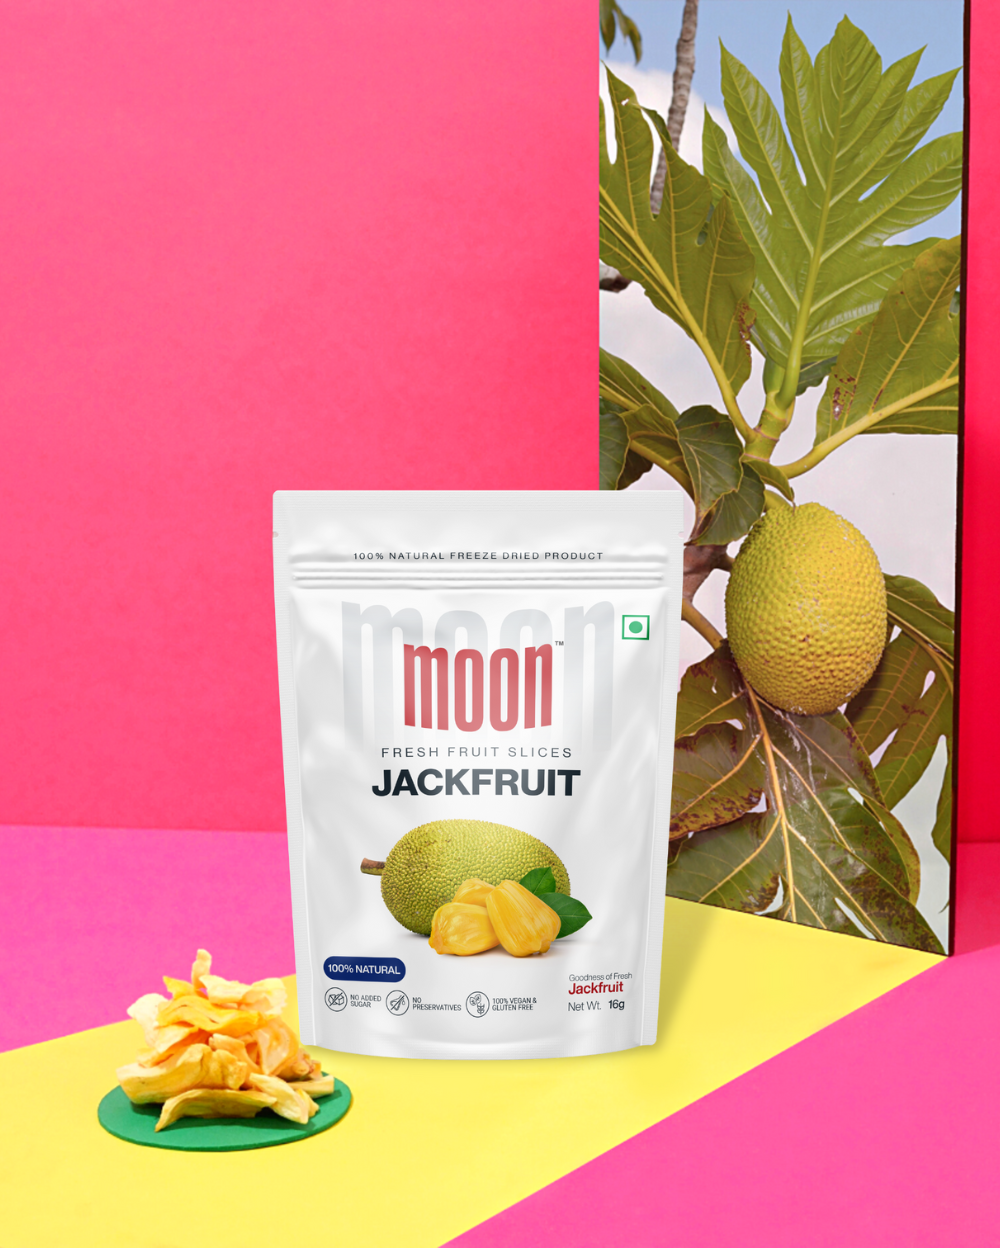 Themoonstoreindia's freeze-dried jackfruit chips on a pink background, showcasing their health benefits and high vitamin C content.